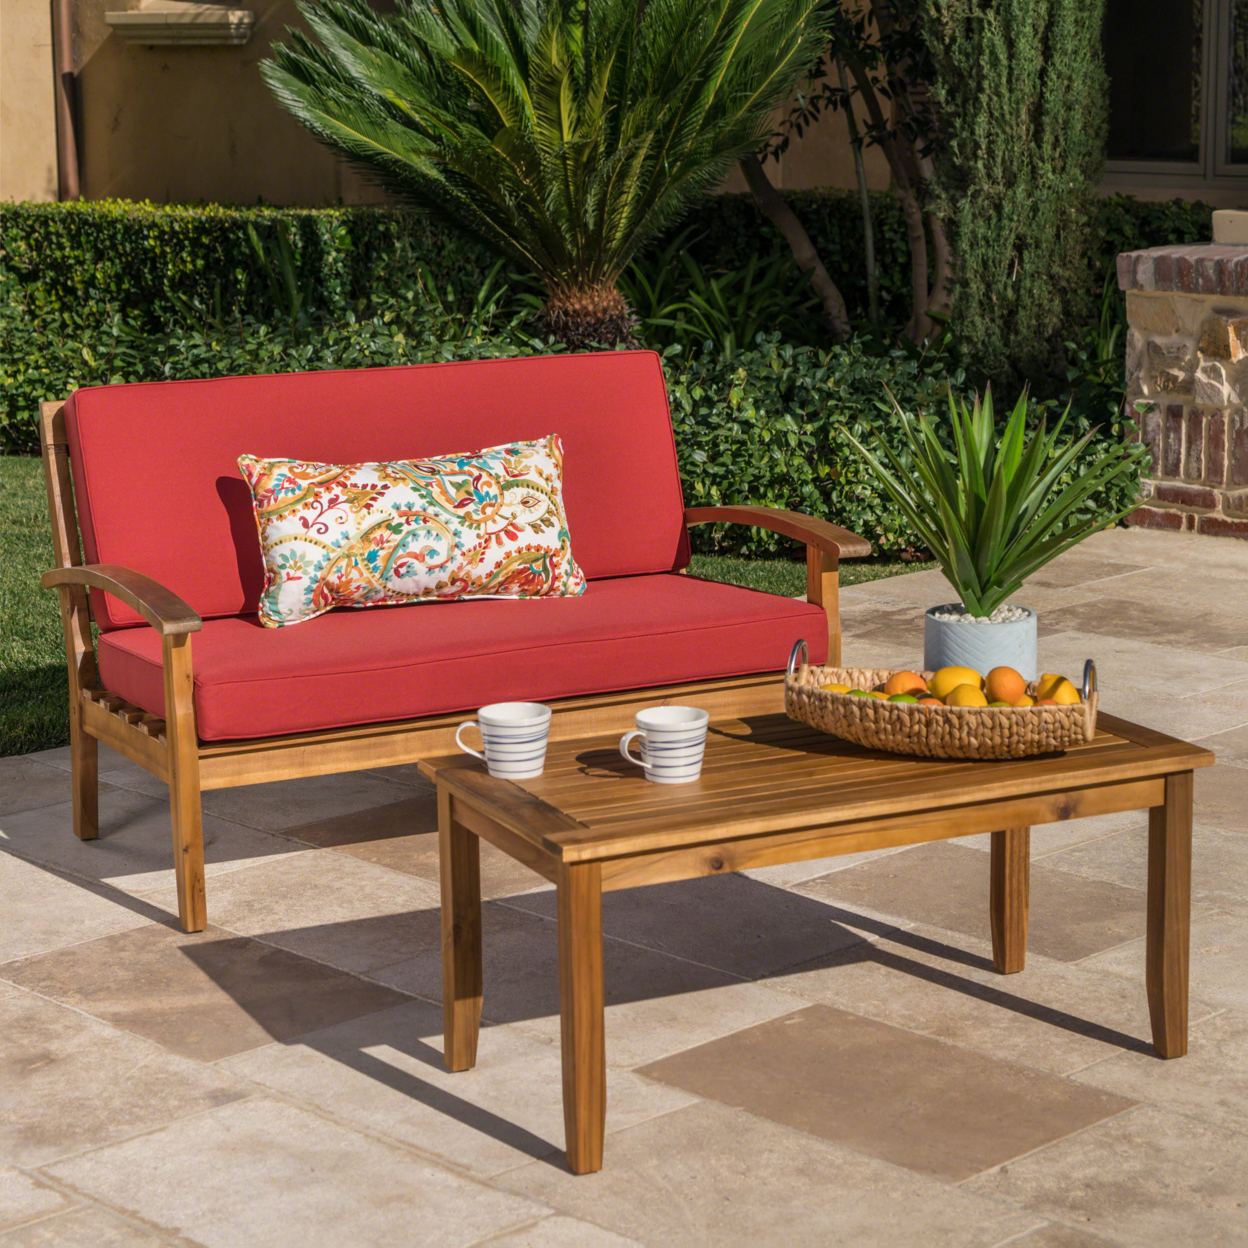 Keanu Outdoor Acacia Wood Loveseat And Coffee Table Set With Cushions - Red